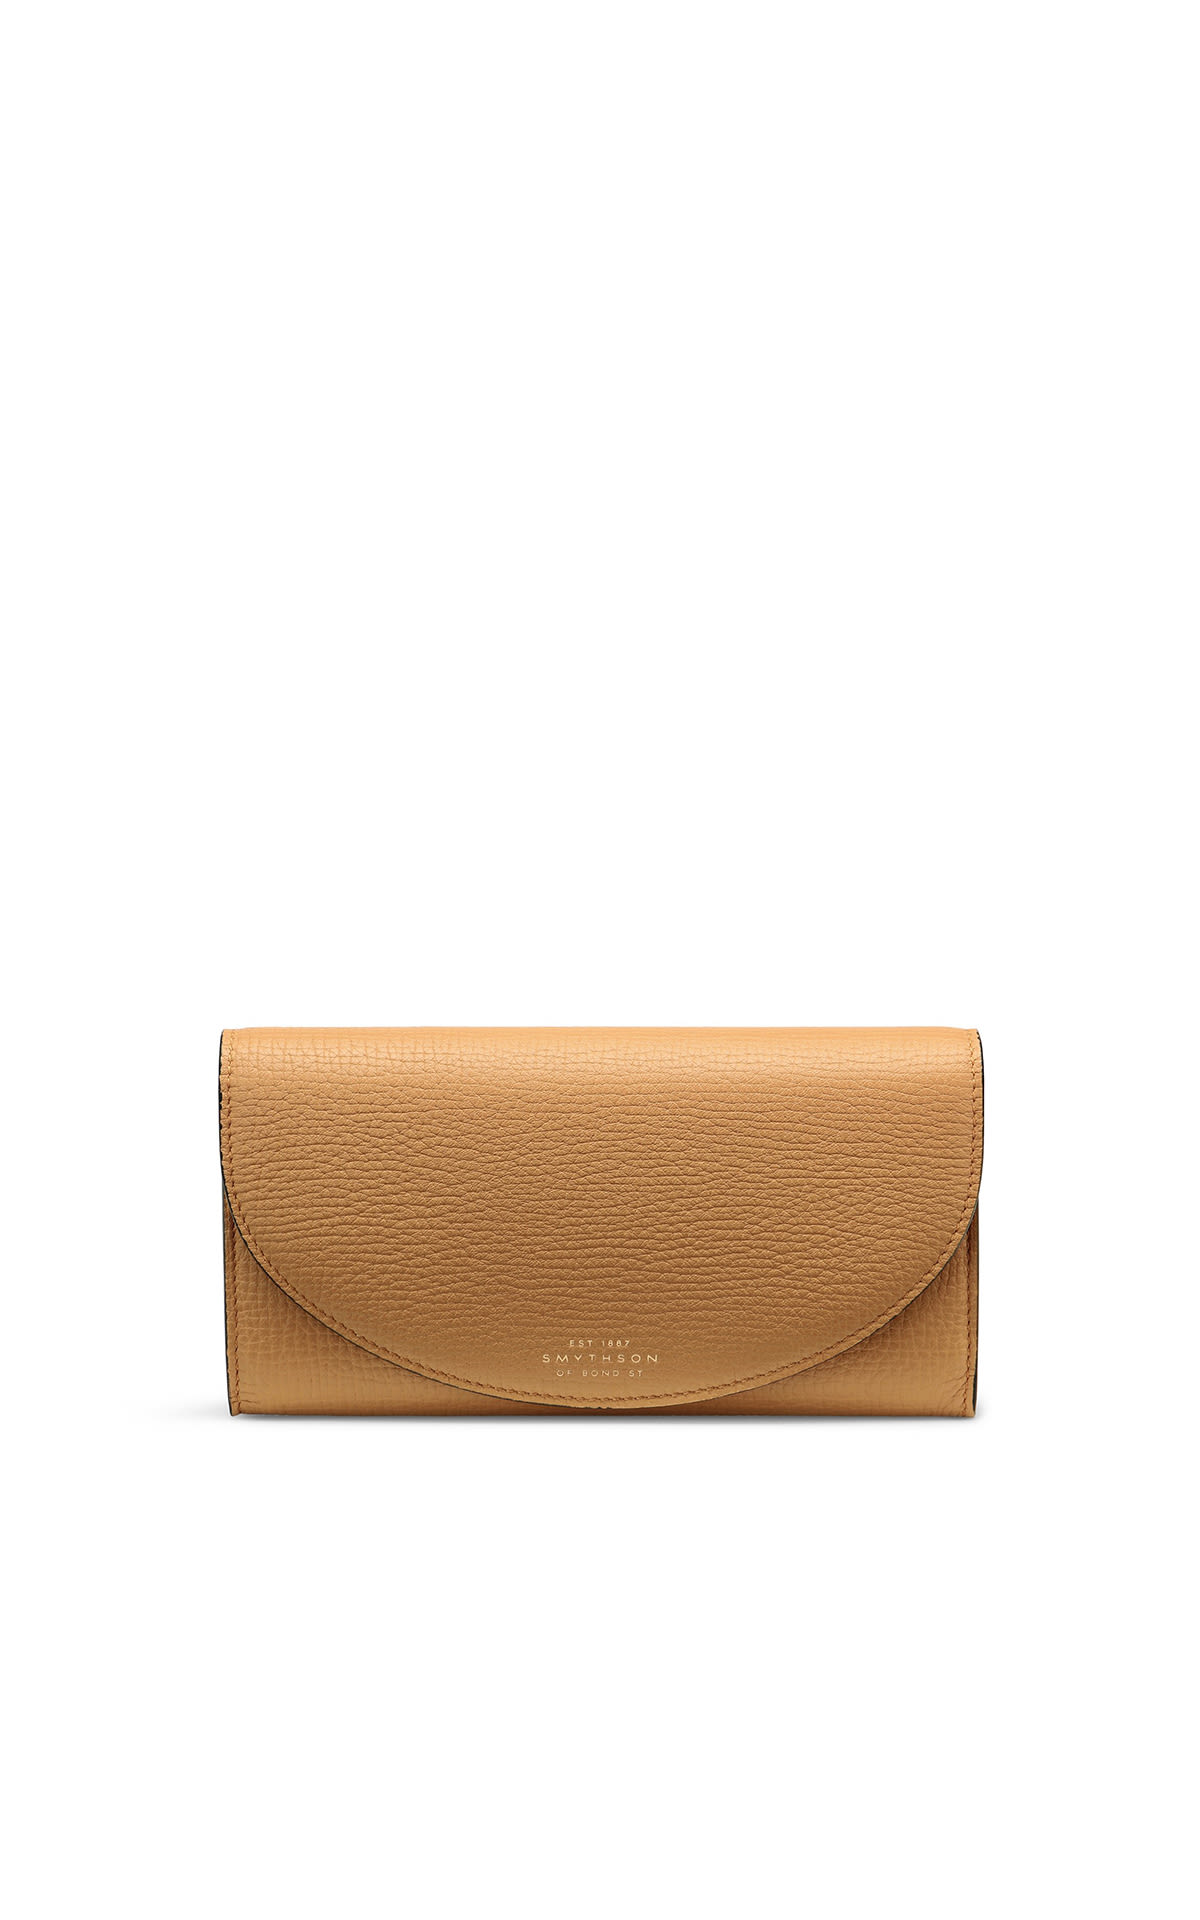 Smythson Ludlow large moon purse toffee from Bicester Village